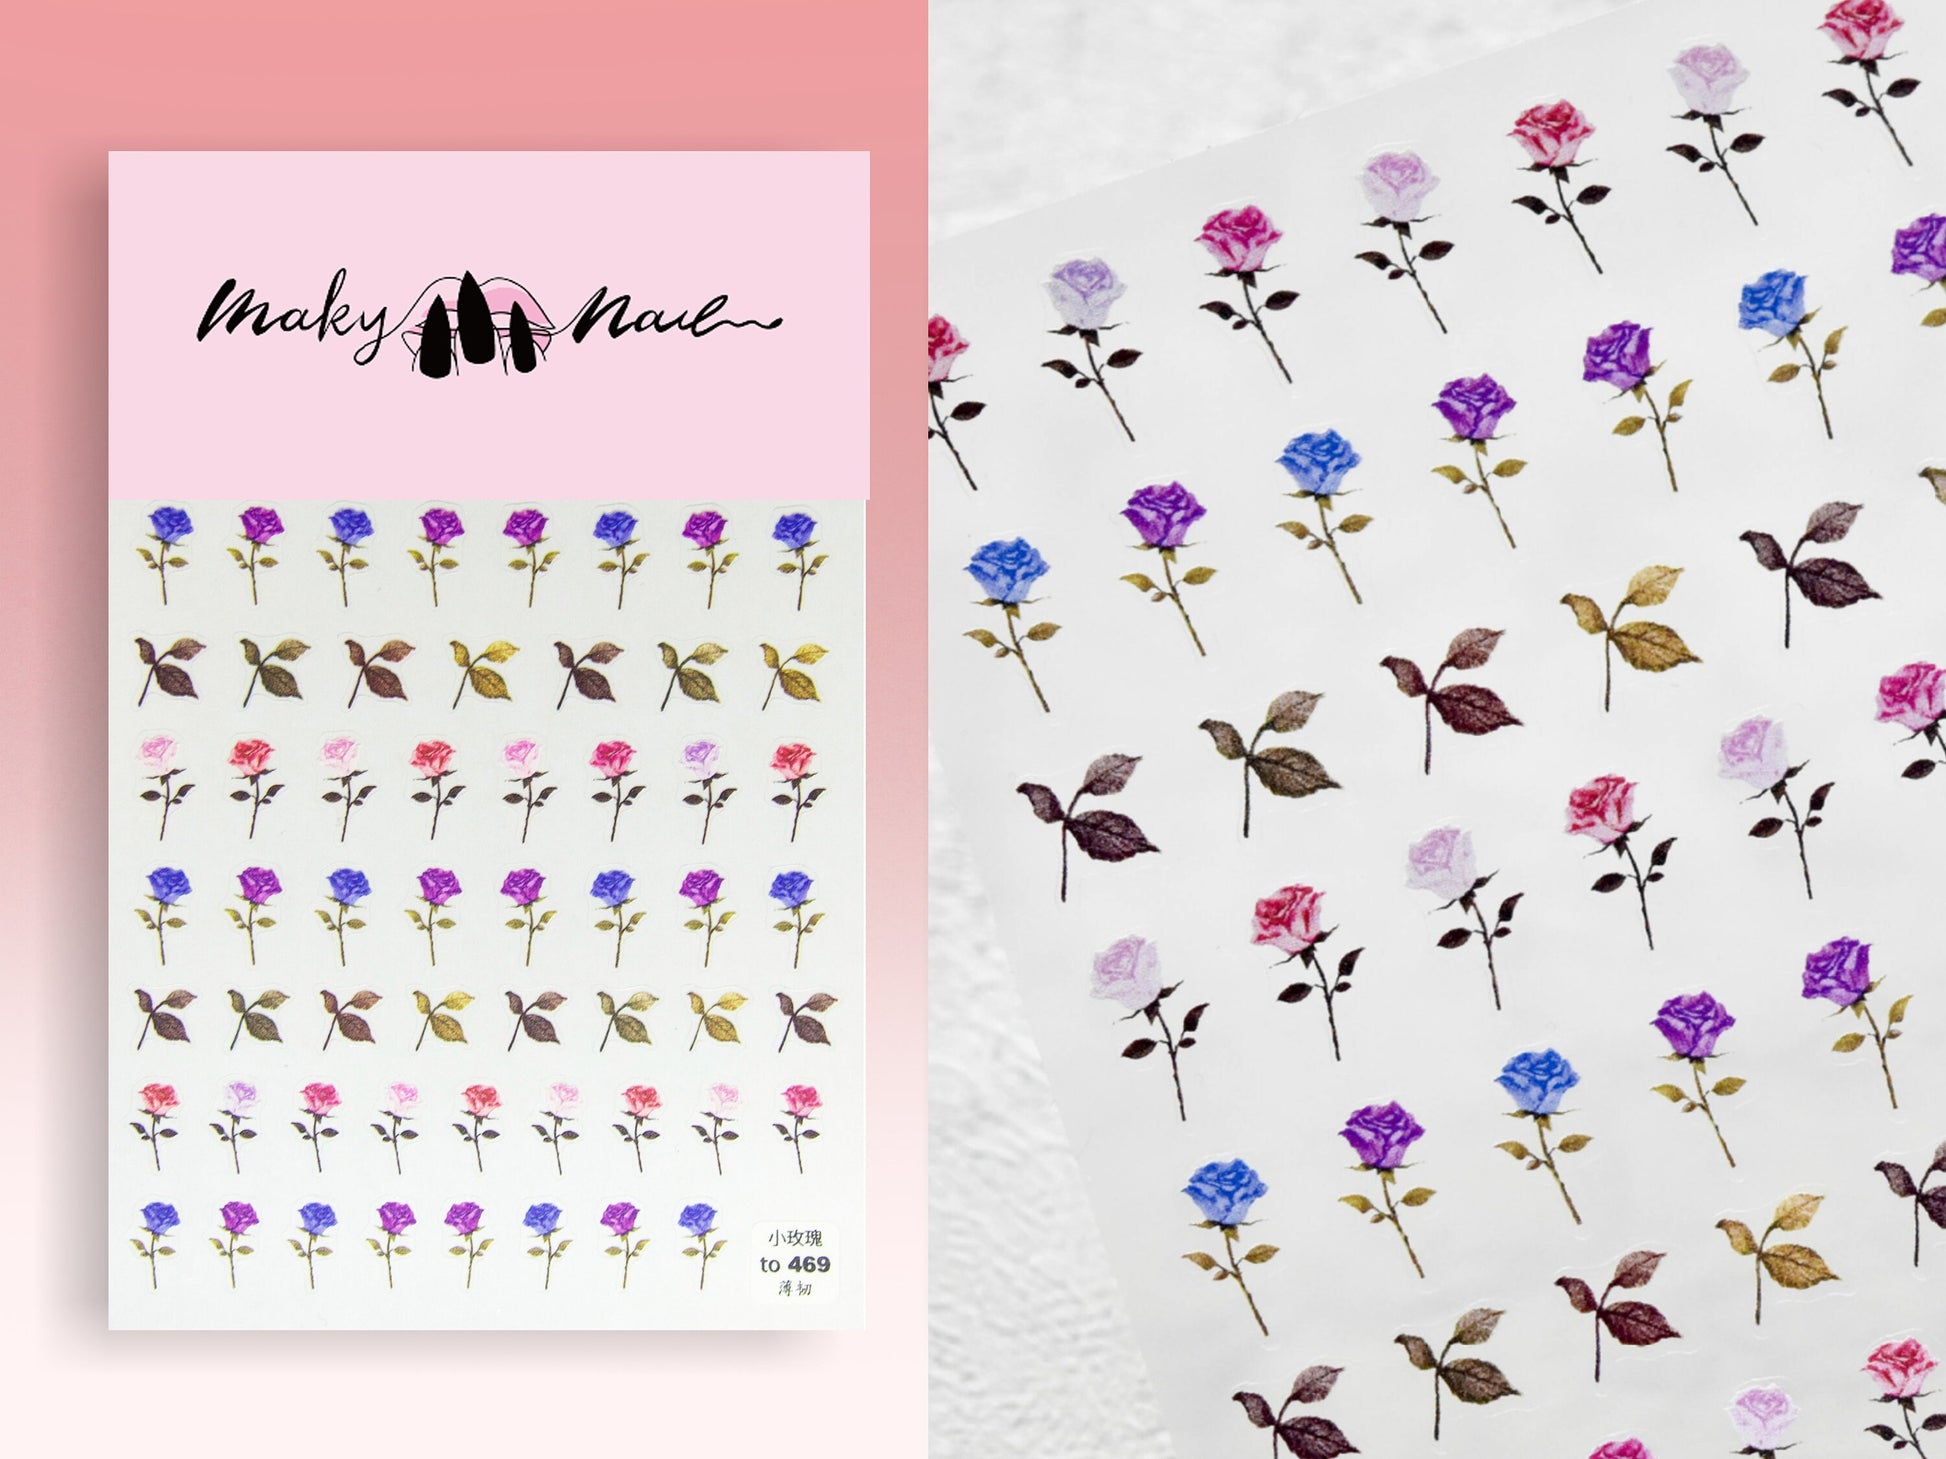 Flower Bouquet Theme nail sticker/ wild flower and leaf 1 Sheet 3D Nail Art Stickers Self Adhesive Decals/ Woodland Miniature Floral Nail